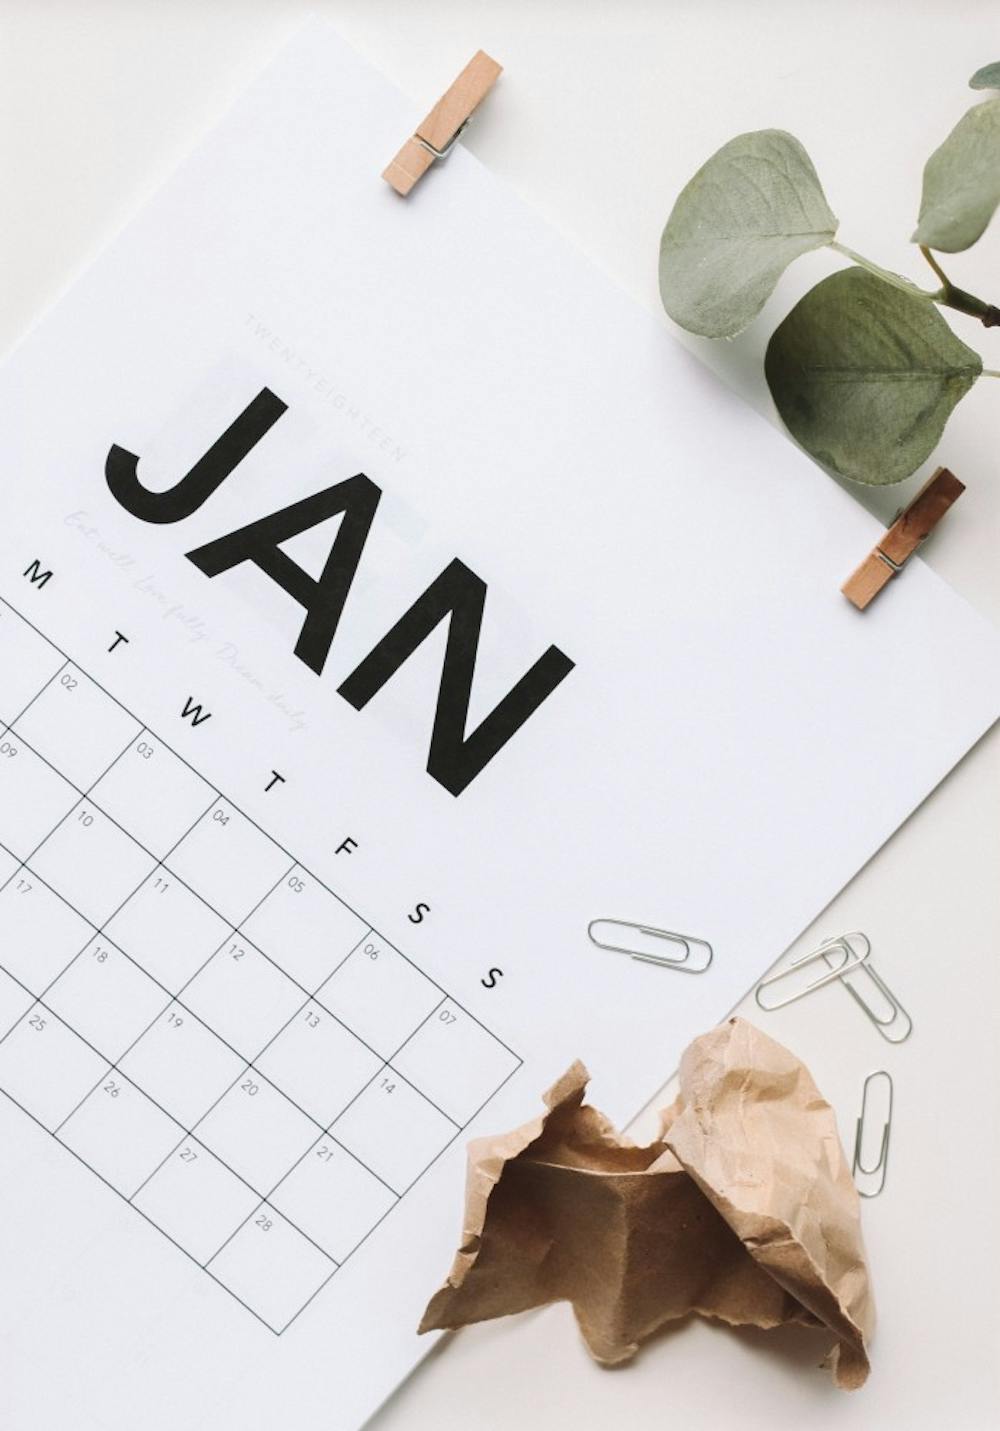 Keep yourself organized with a new do-it-yourself calendar